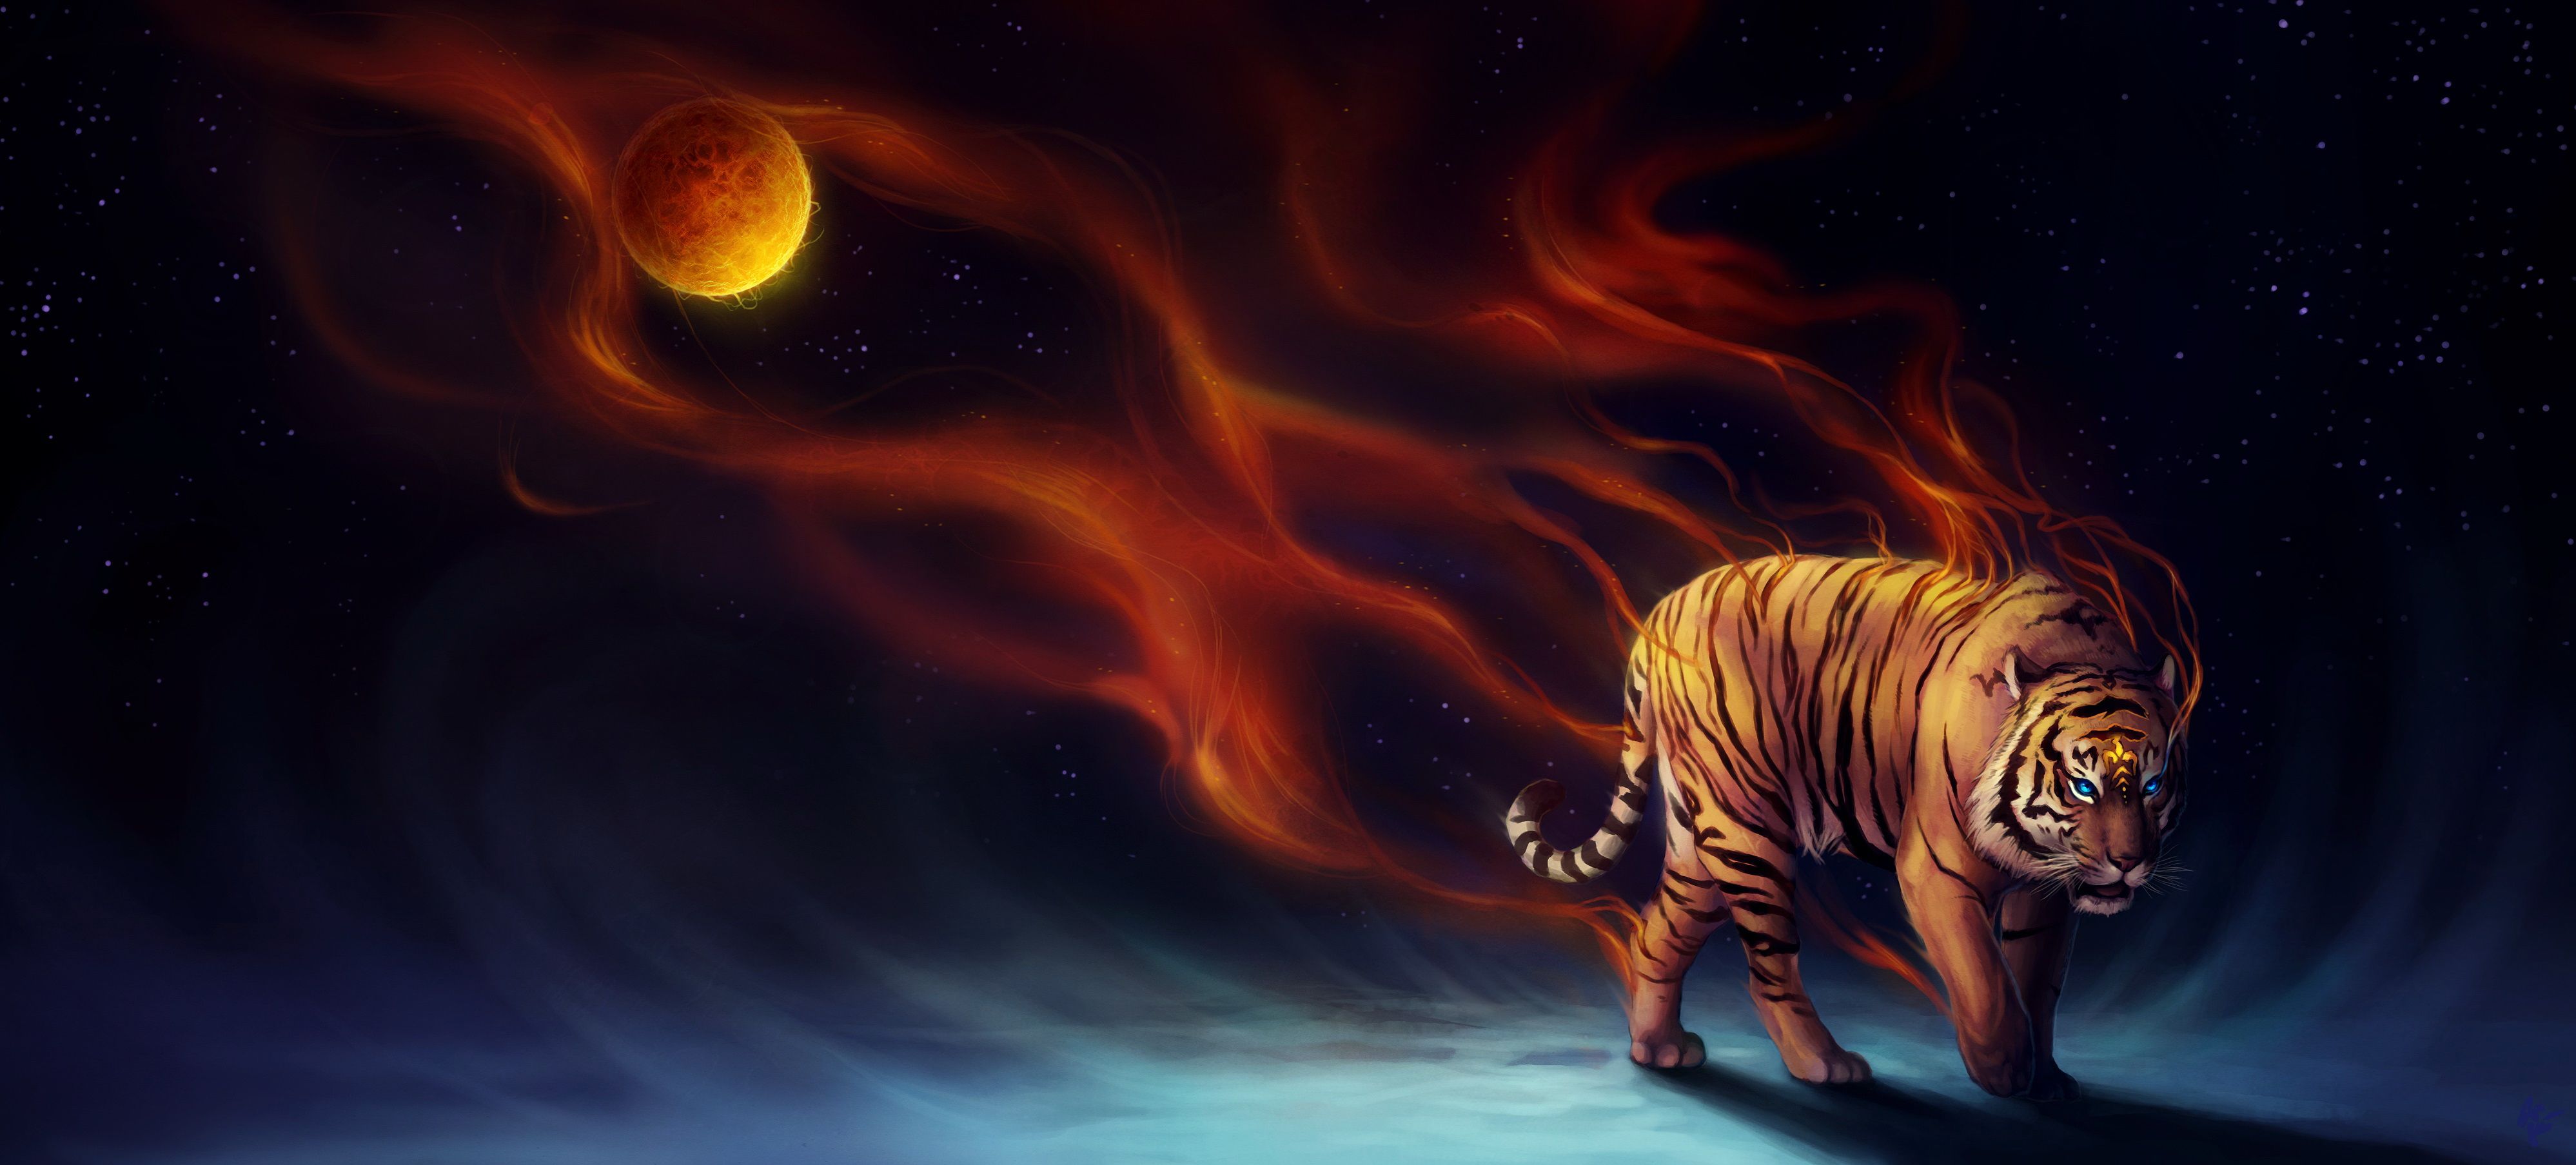 Tiger Wildlife Artwork Wallpapers posted by Michelle Cunningham